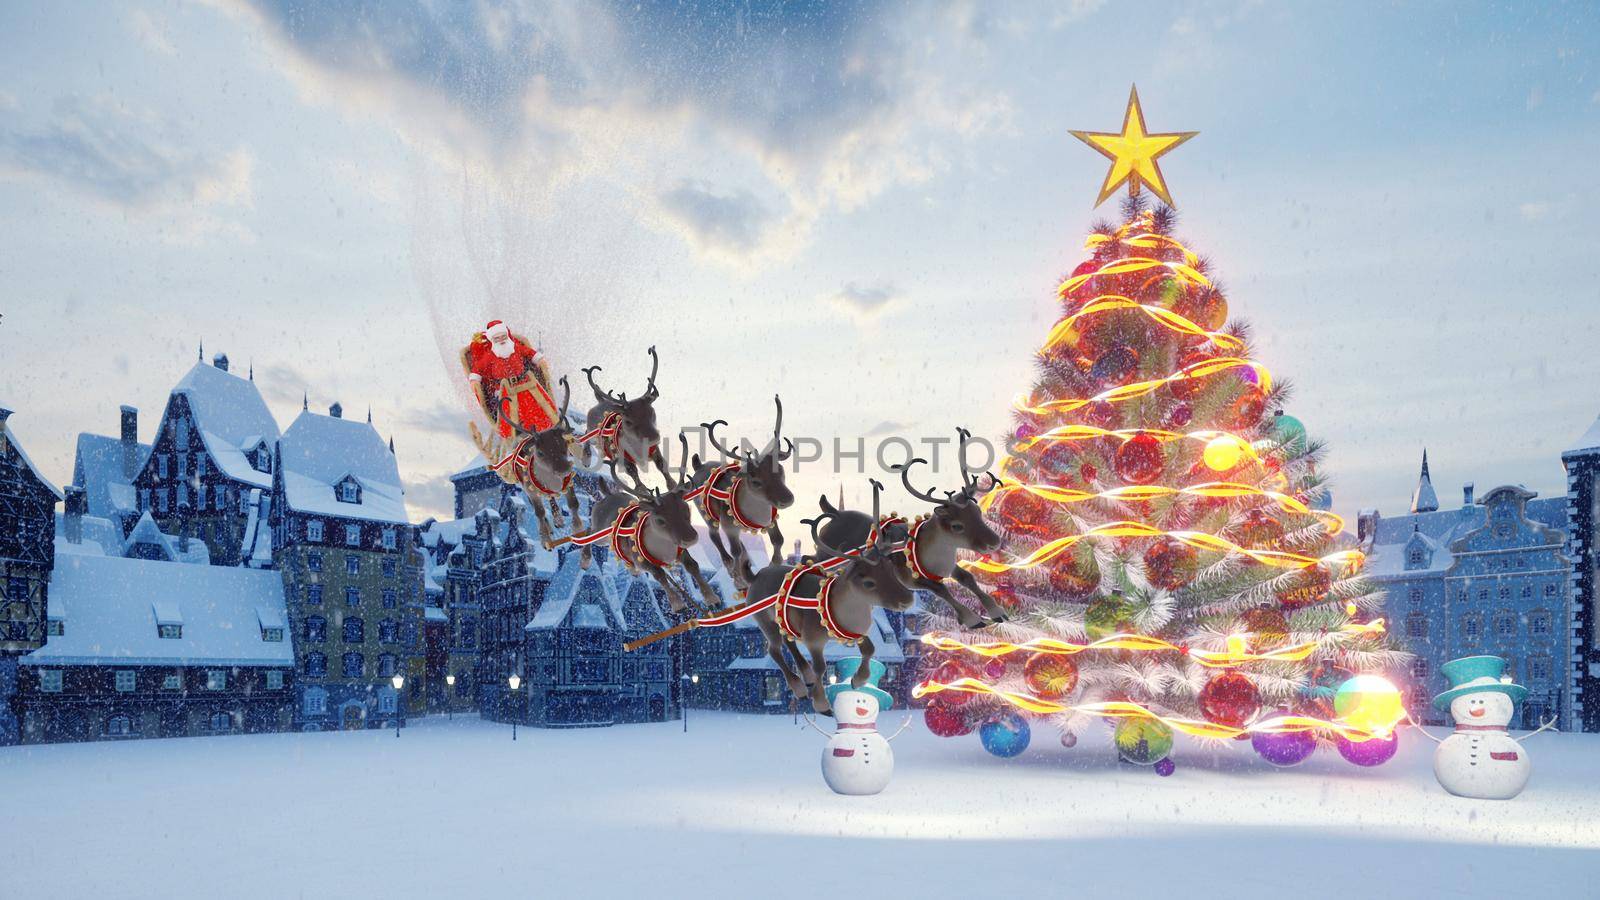 Christmas tree with colorful colorful balls. Santa Claus on a sleigh with Christmas reindeer. Snowmen and Christmas and new year decorations and gifts. A small town in anticipation of the holiday.